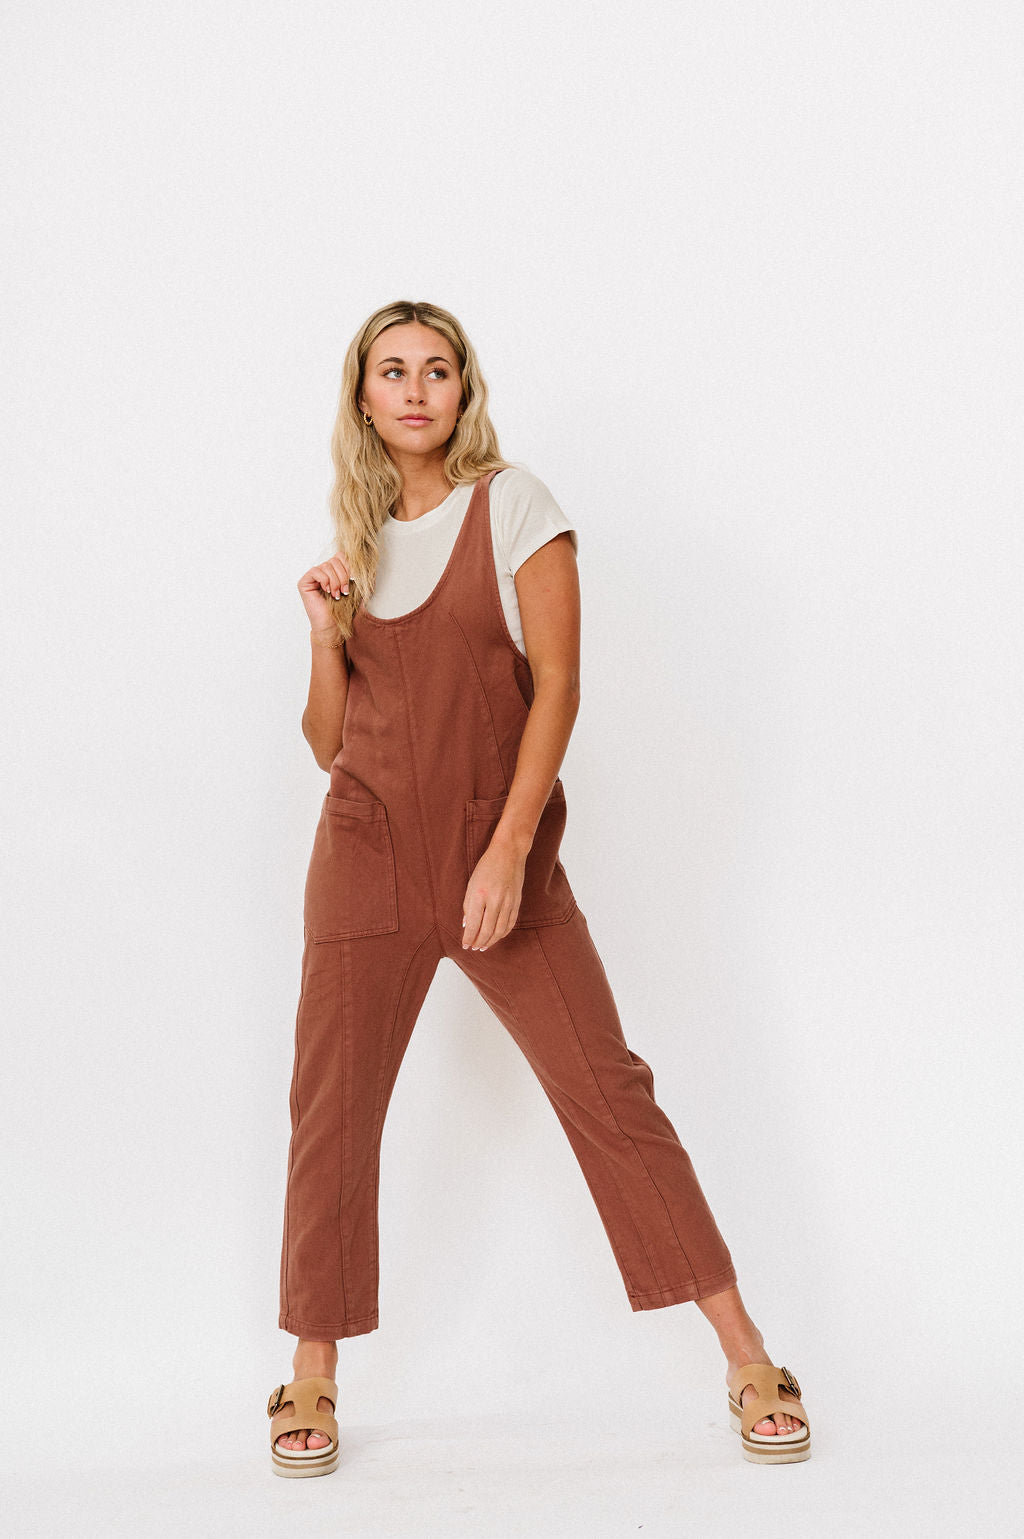 Relaxed fit ankle length women's jumpsuit